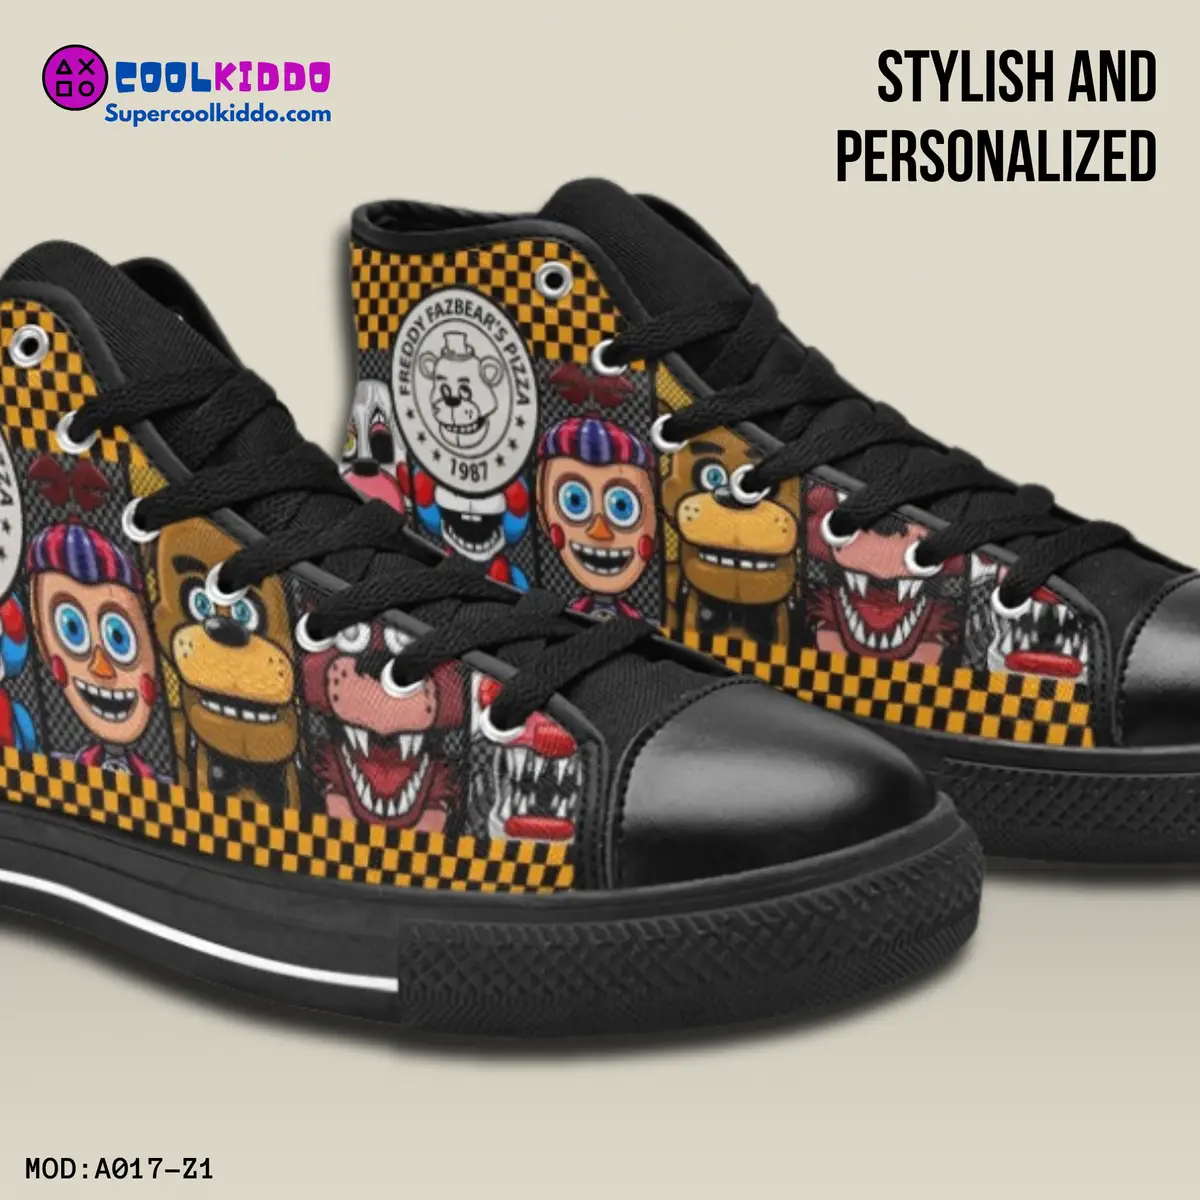 Five Nights at Freddy’s Movie Inspired High Top Shoes for Kids – Horror Characters Cool Kiddo 24